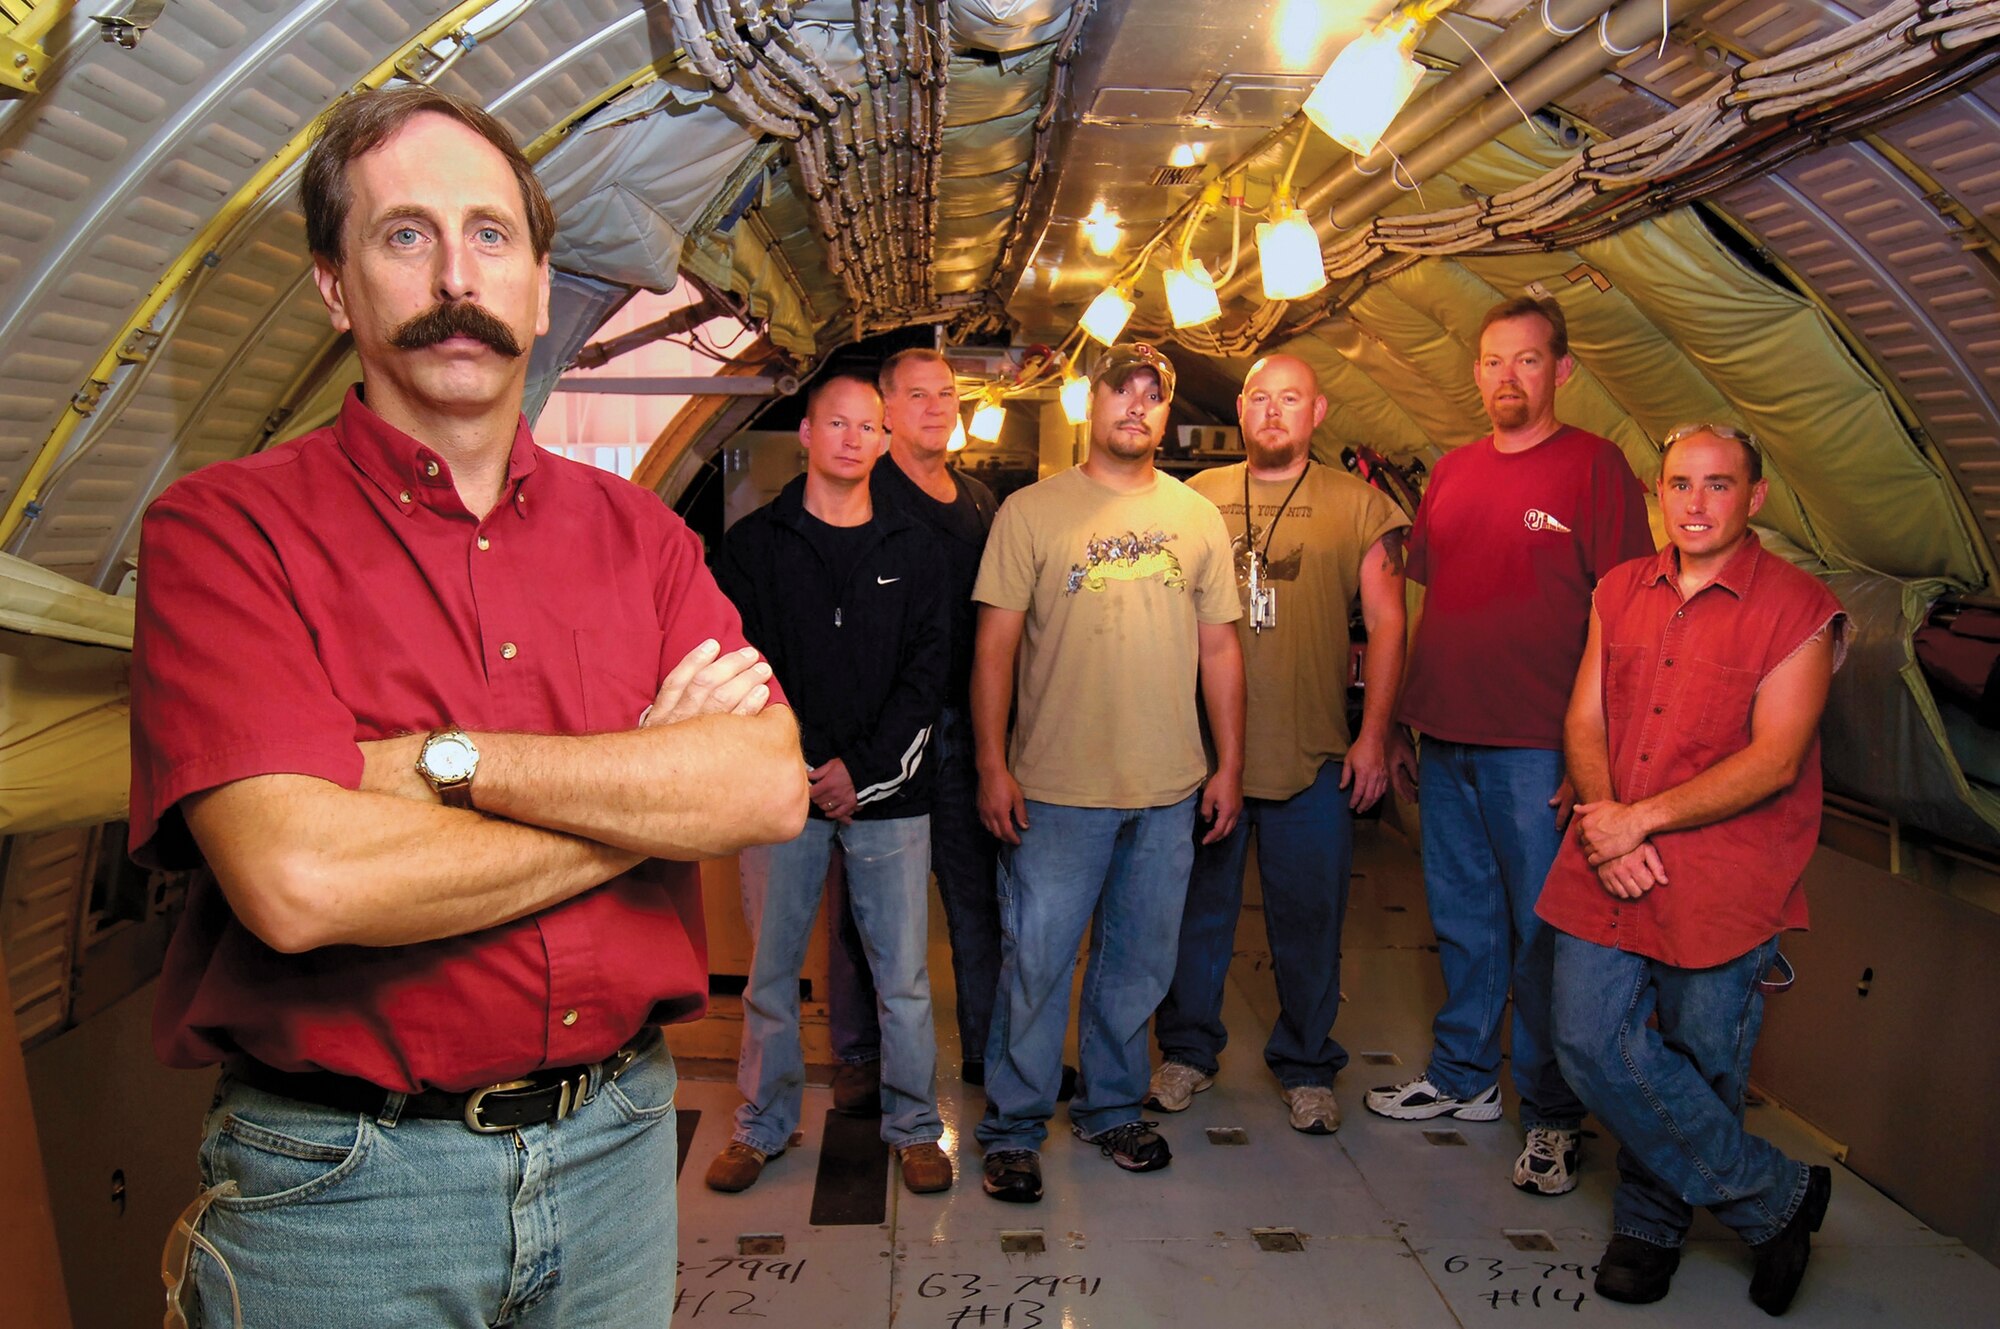 Tinker aircraft planner Brian deFonteny was part of a team who changed the KC-135 cabin pressure testing process, carving days off the flow time and saving the Air Force millions.  Mr. deFonteny stands inside a -135 with mechanics who benefit from the new system.  Back from left are; Darrell McElwee, Clarence Stallard, Josh Massey, Grant Simms, Chuck Drake, and Shane Spencer, who was on the planning team. (Air Force photo by Dave Faytinger)
